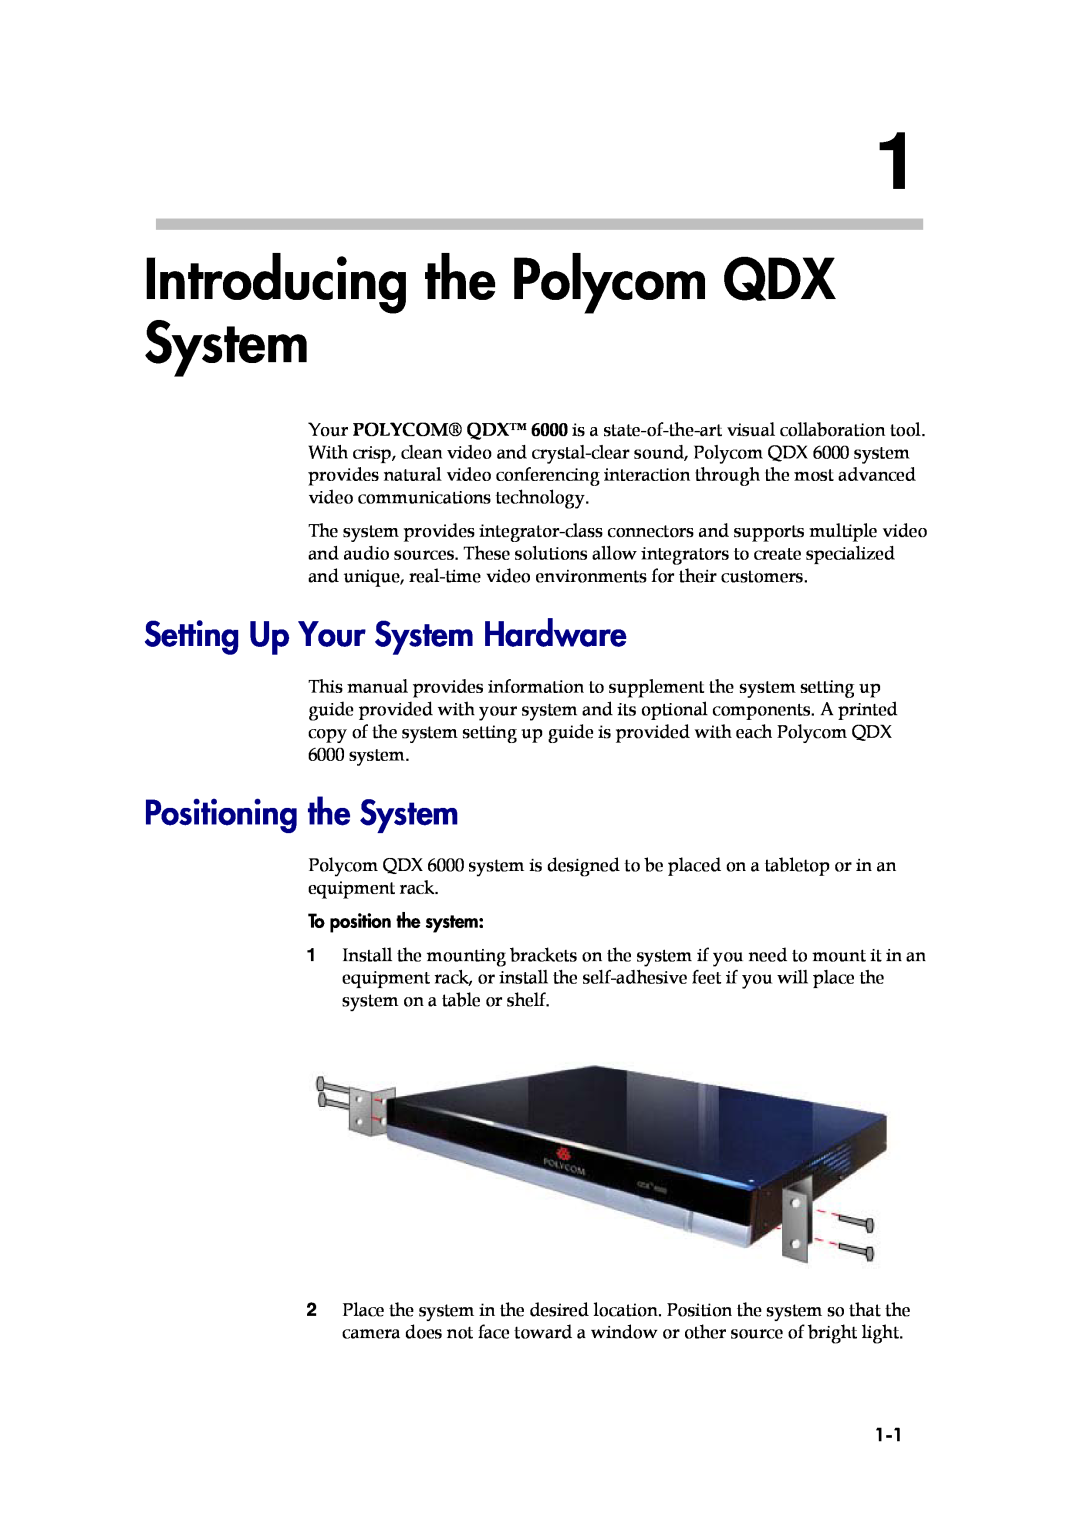 Polycom 6000 manual Introducing the Polycom QDX System, Setting Up Your System Hardware, Positioning the System 